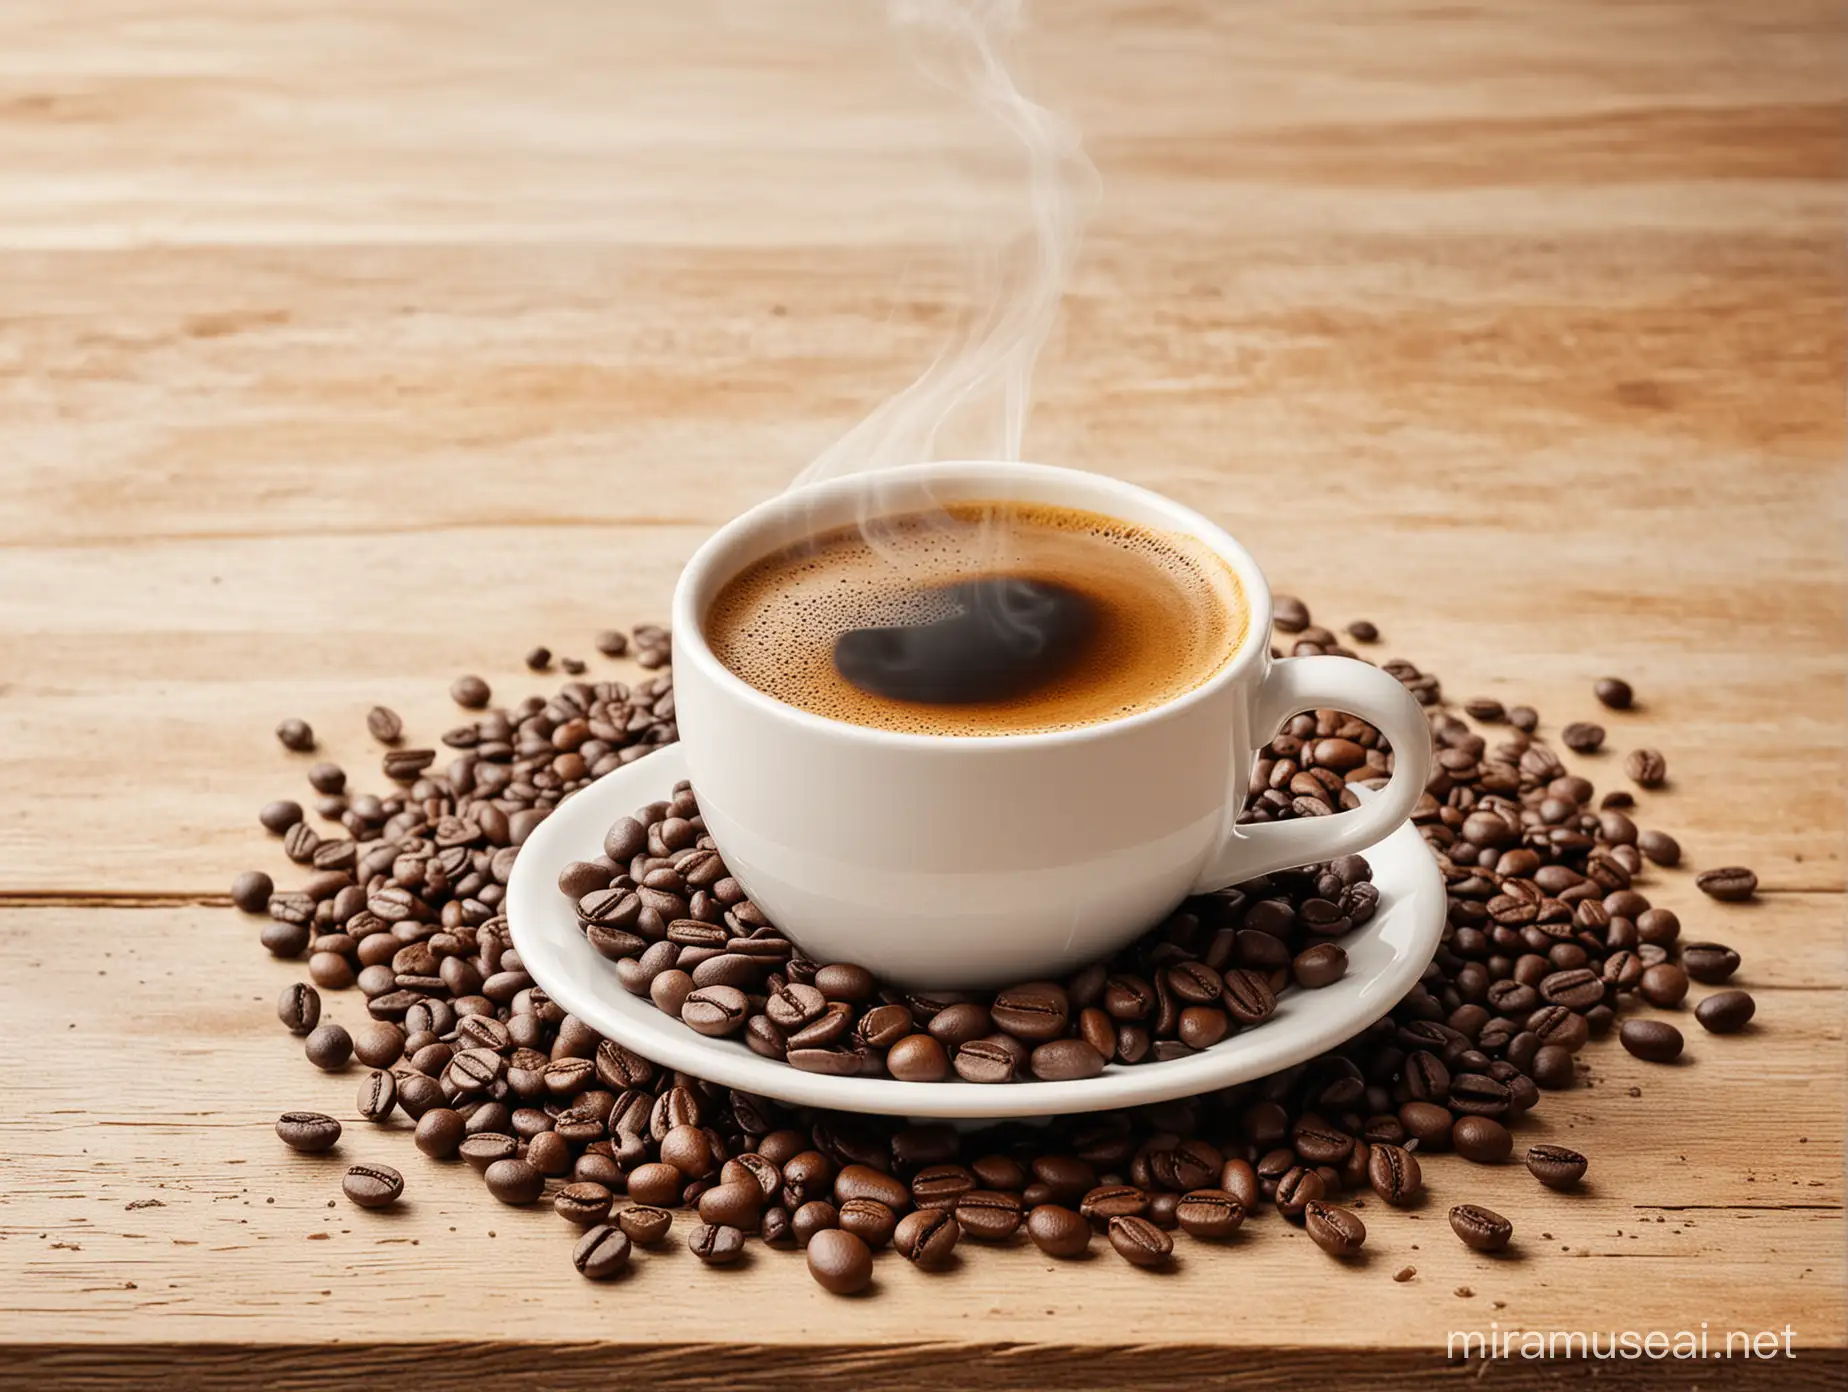 A steaming cup of coffee sits on a rustic wooden table, surrounded by a scattering of freshly roasted coffee beans. The warm, earthy tones of the beans contrast beautifully against the crisp white background, creating a visually stunning image.